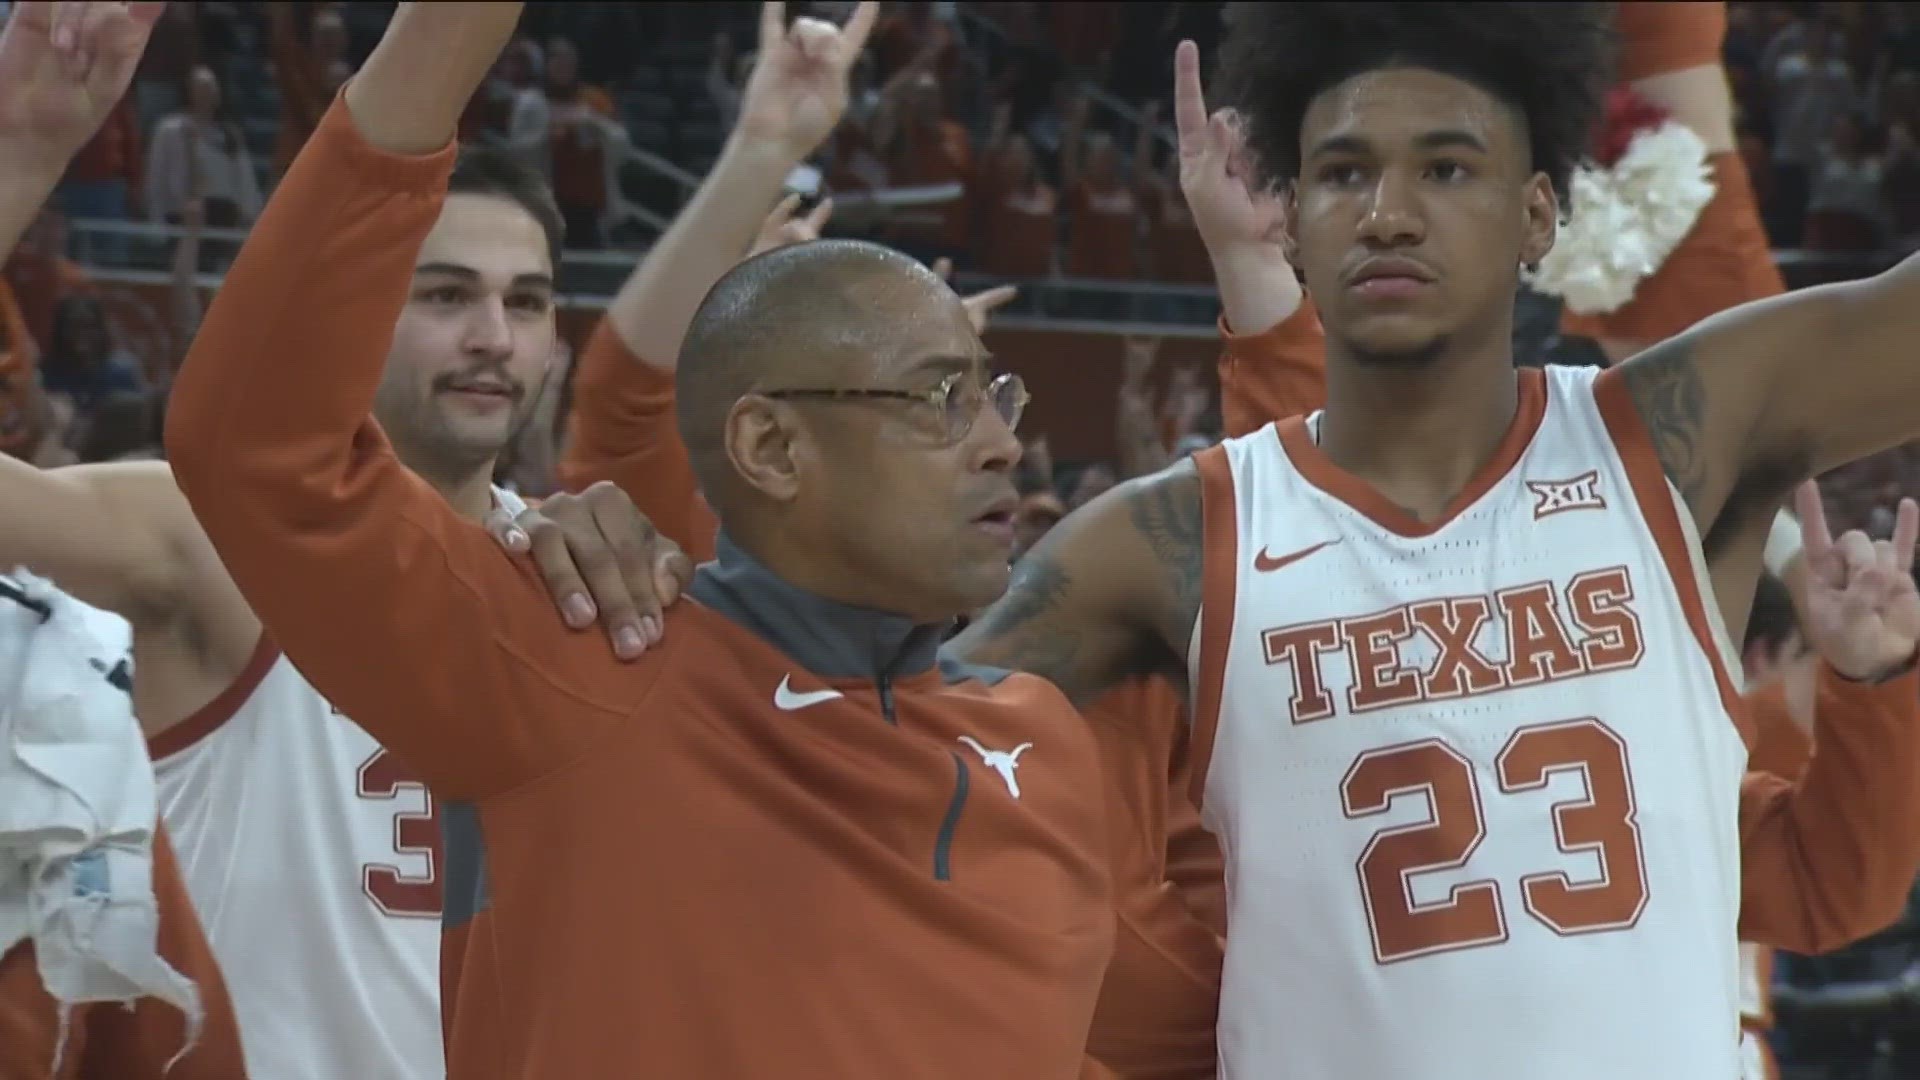 Mitchell's return will ensure the Longhorns high expectations going into the 2023-24 season.